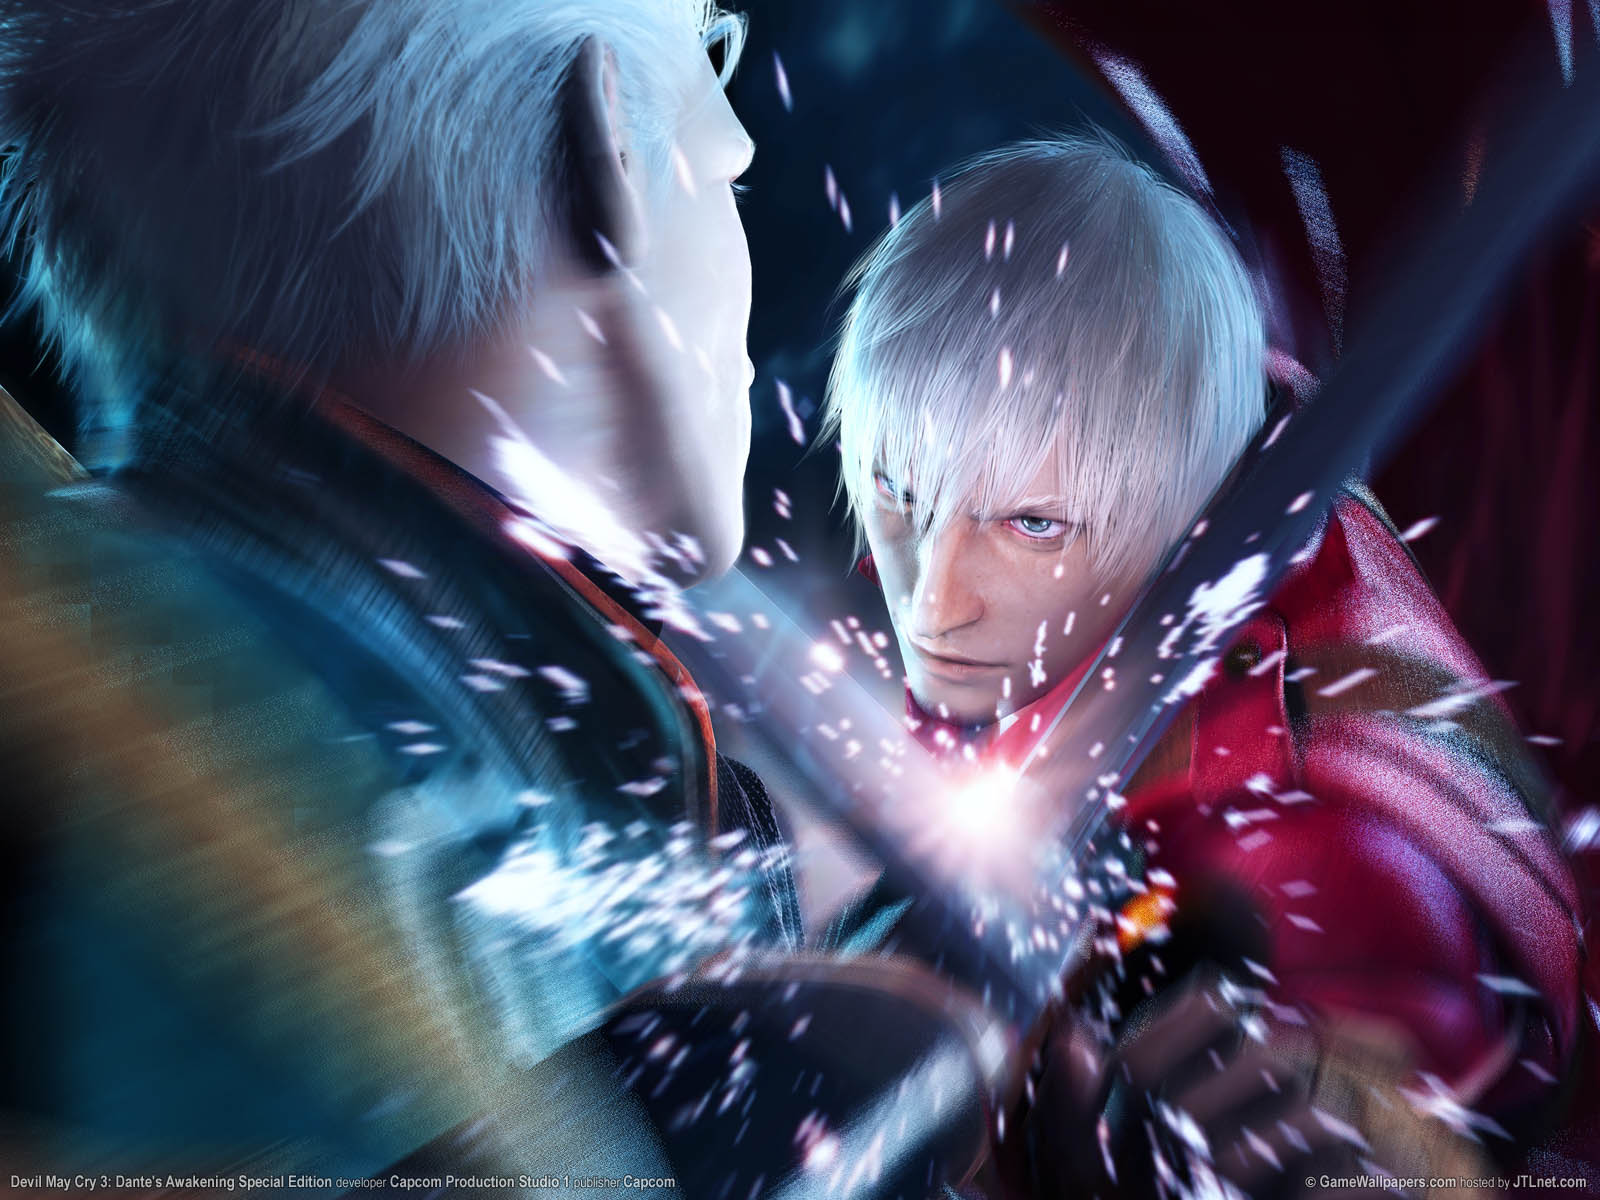 Devil May Cry 3%3A Dante%5C%27s Awakening Special Edition achtergrond 01 1600x1200